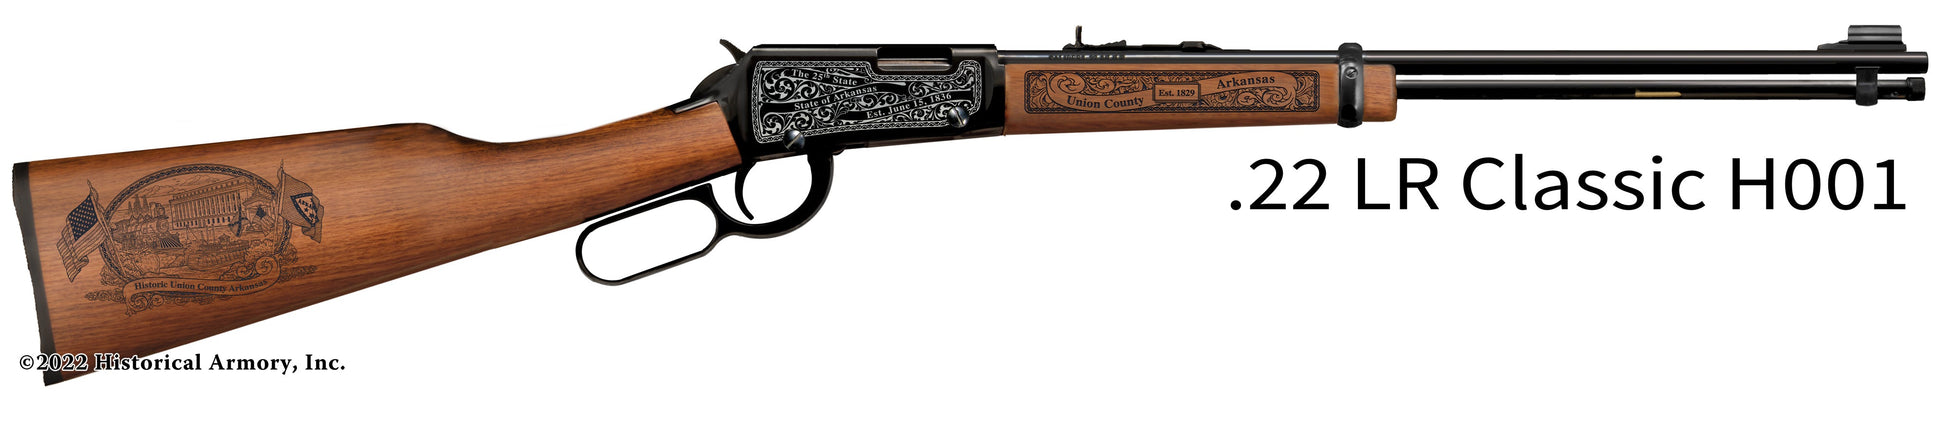 Union County Arkansas Engraved Henry H001 Rifle